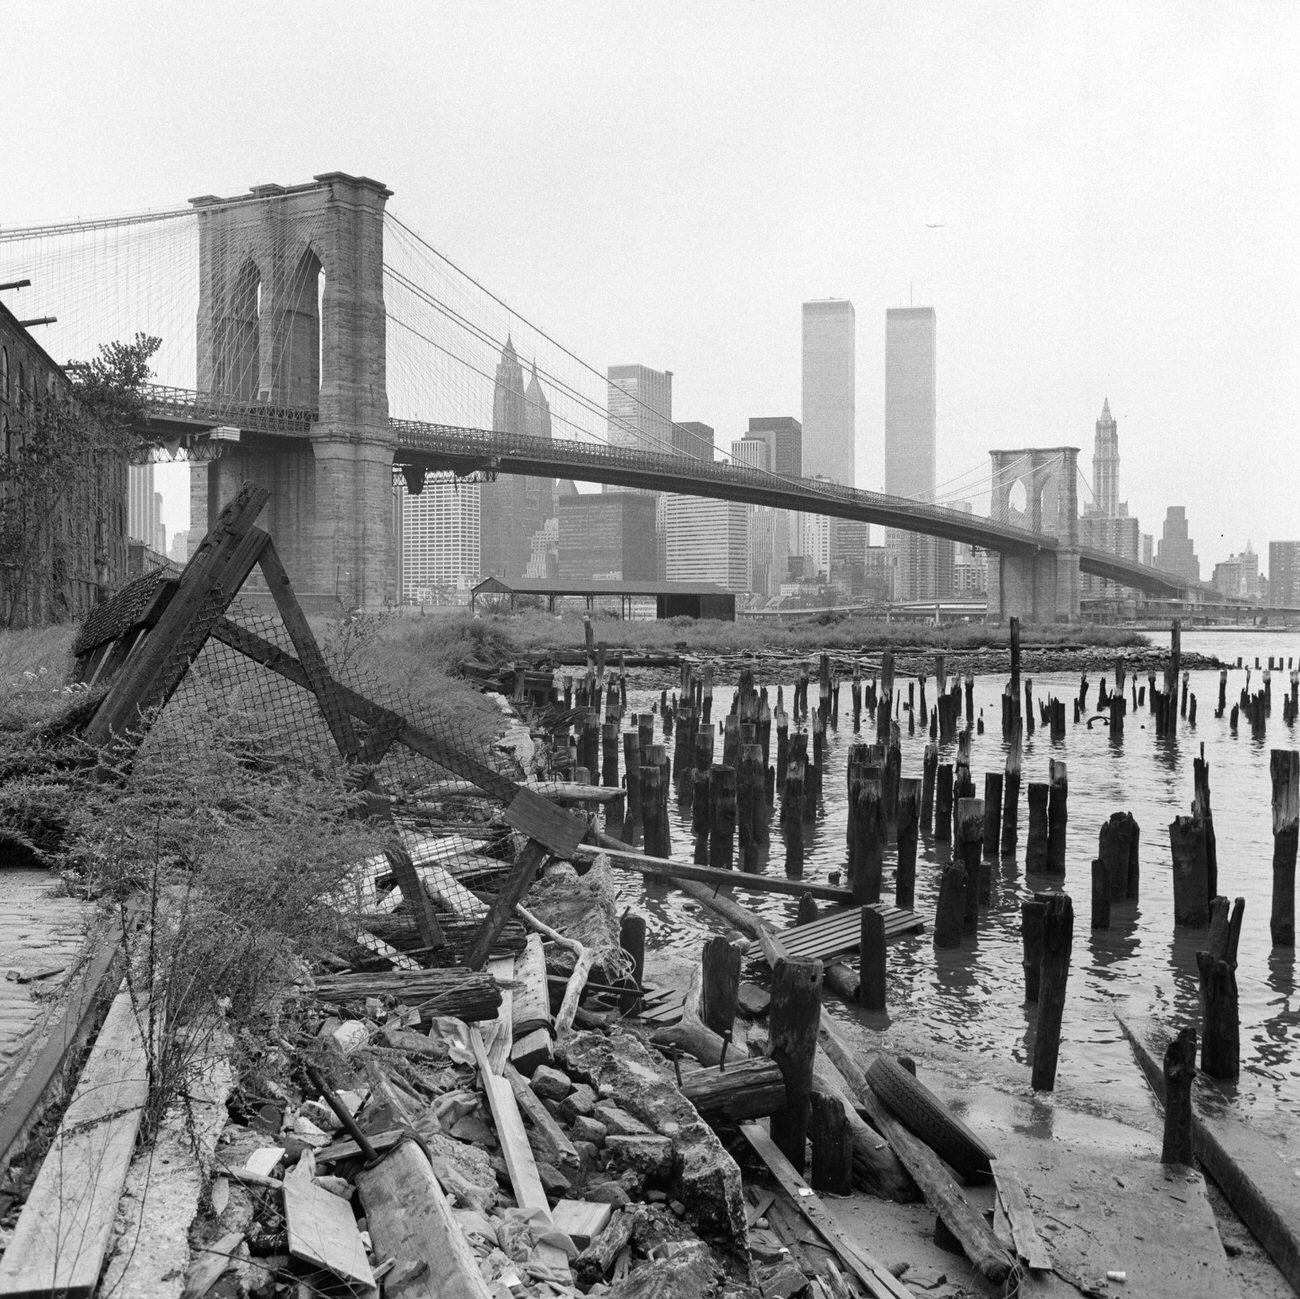 Southwest View From Empire Stores Across East River To Lower Manhattan, Brooklyn, 1977.